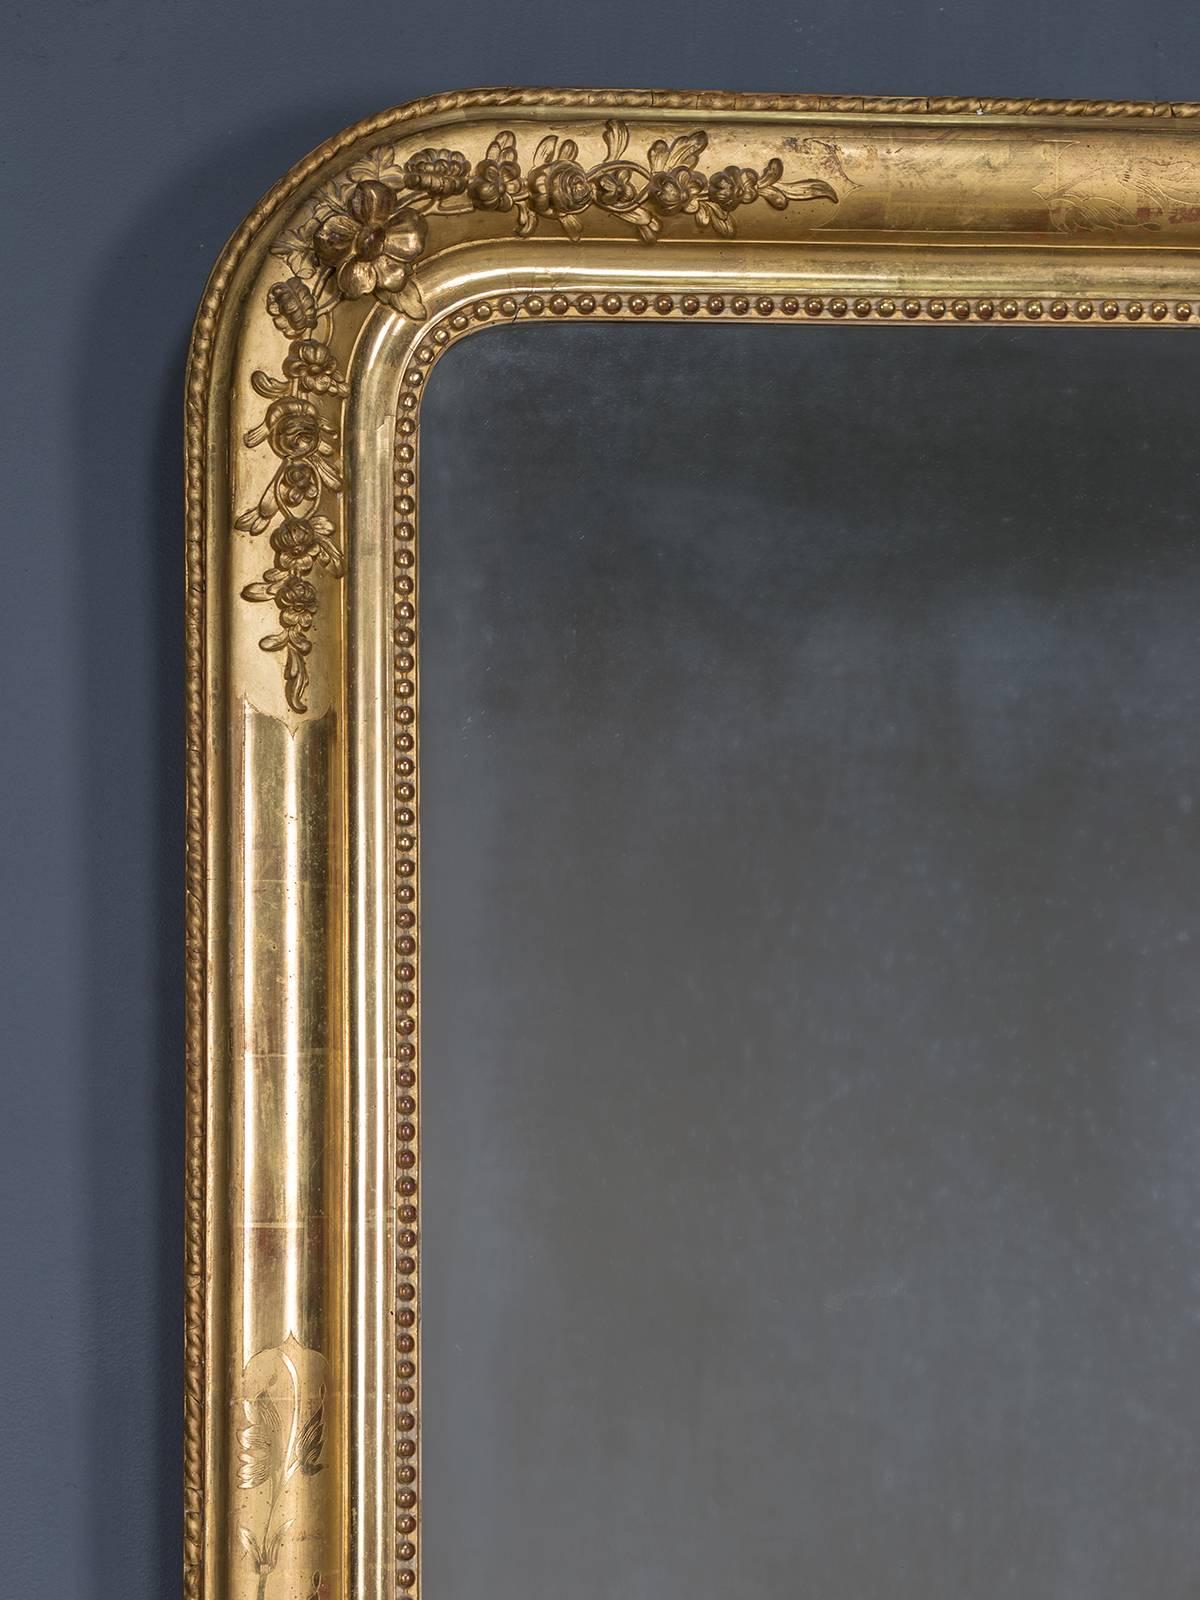 Receive our new selections direct from 1stdibs by email each week. Please click on “Follow Dealer” button below and see them first!

The elegant decoration on this antique French mirror circa 1880 is placed in a symmetrical manner with both raised